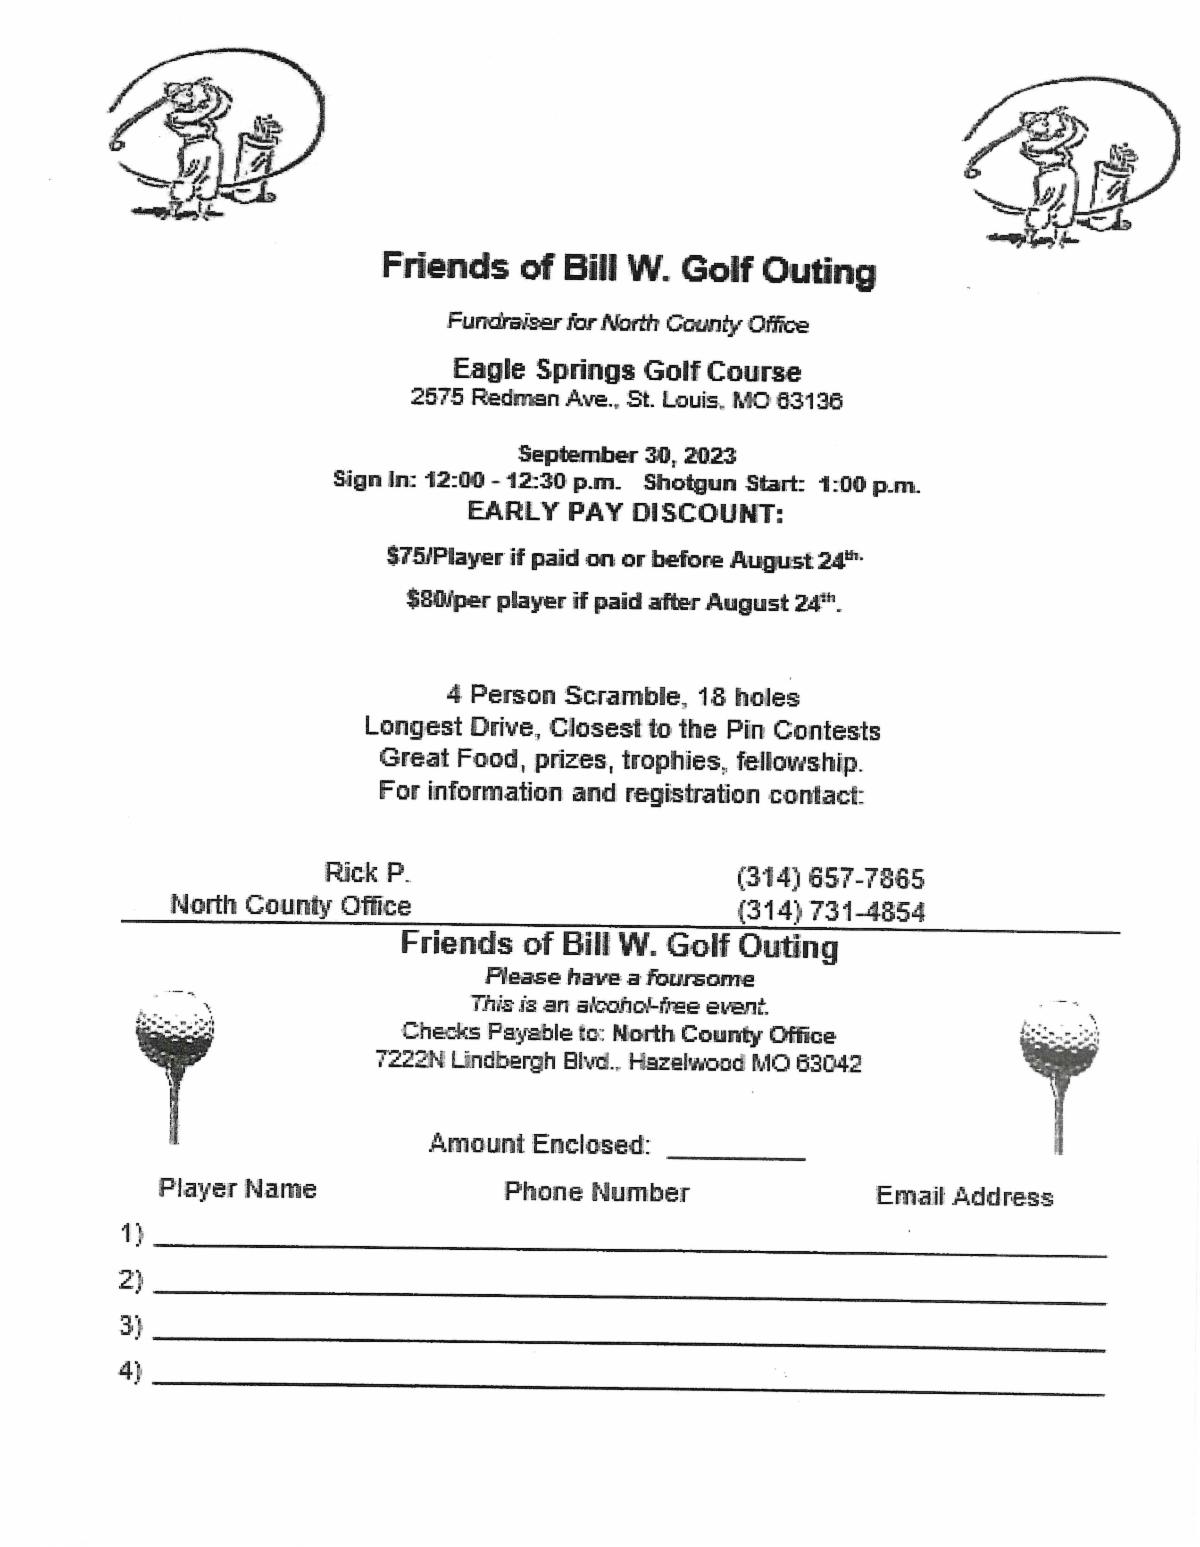 Friends of Bill W Golf Outing